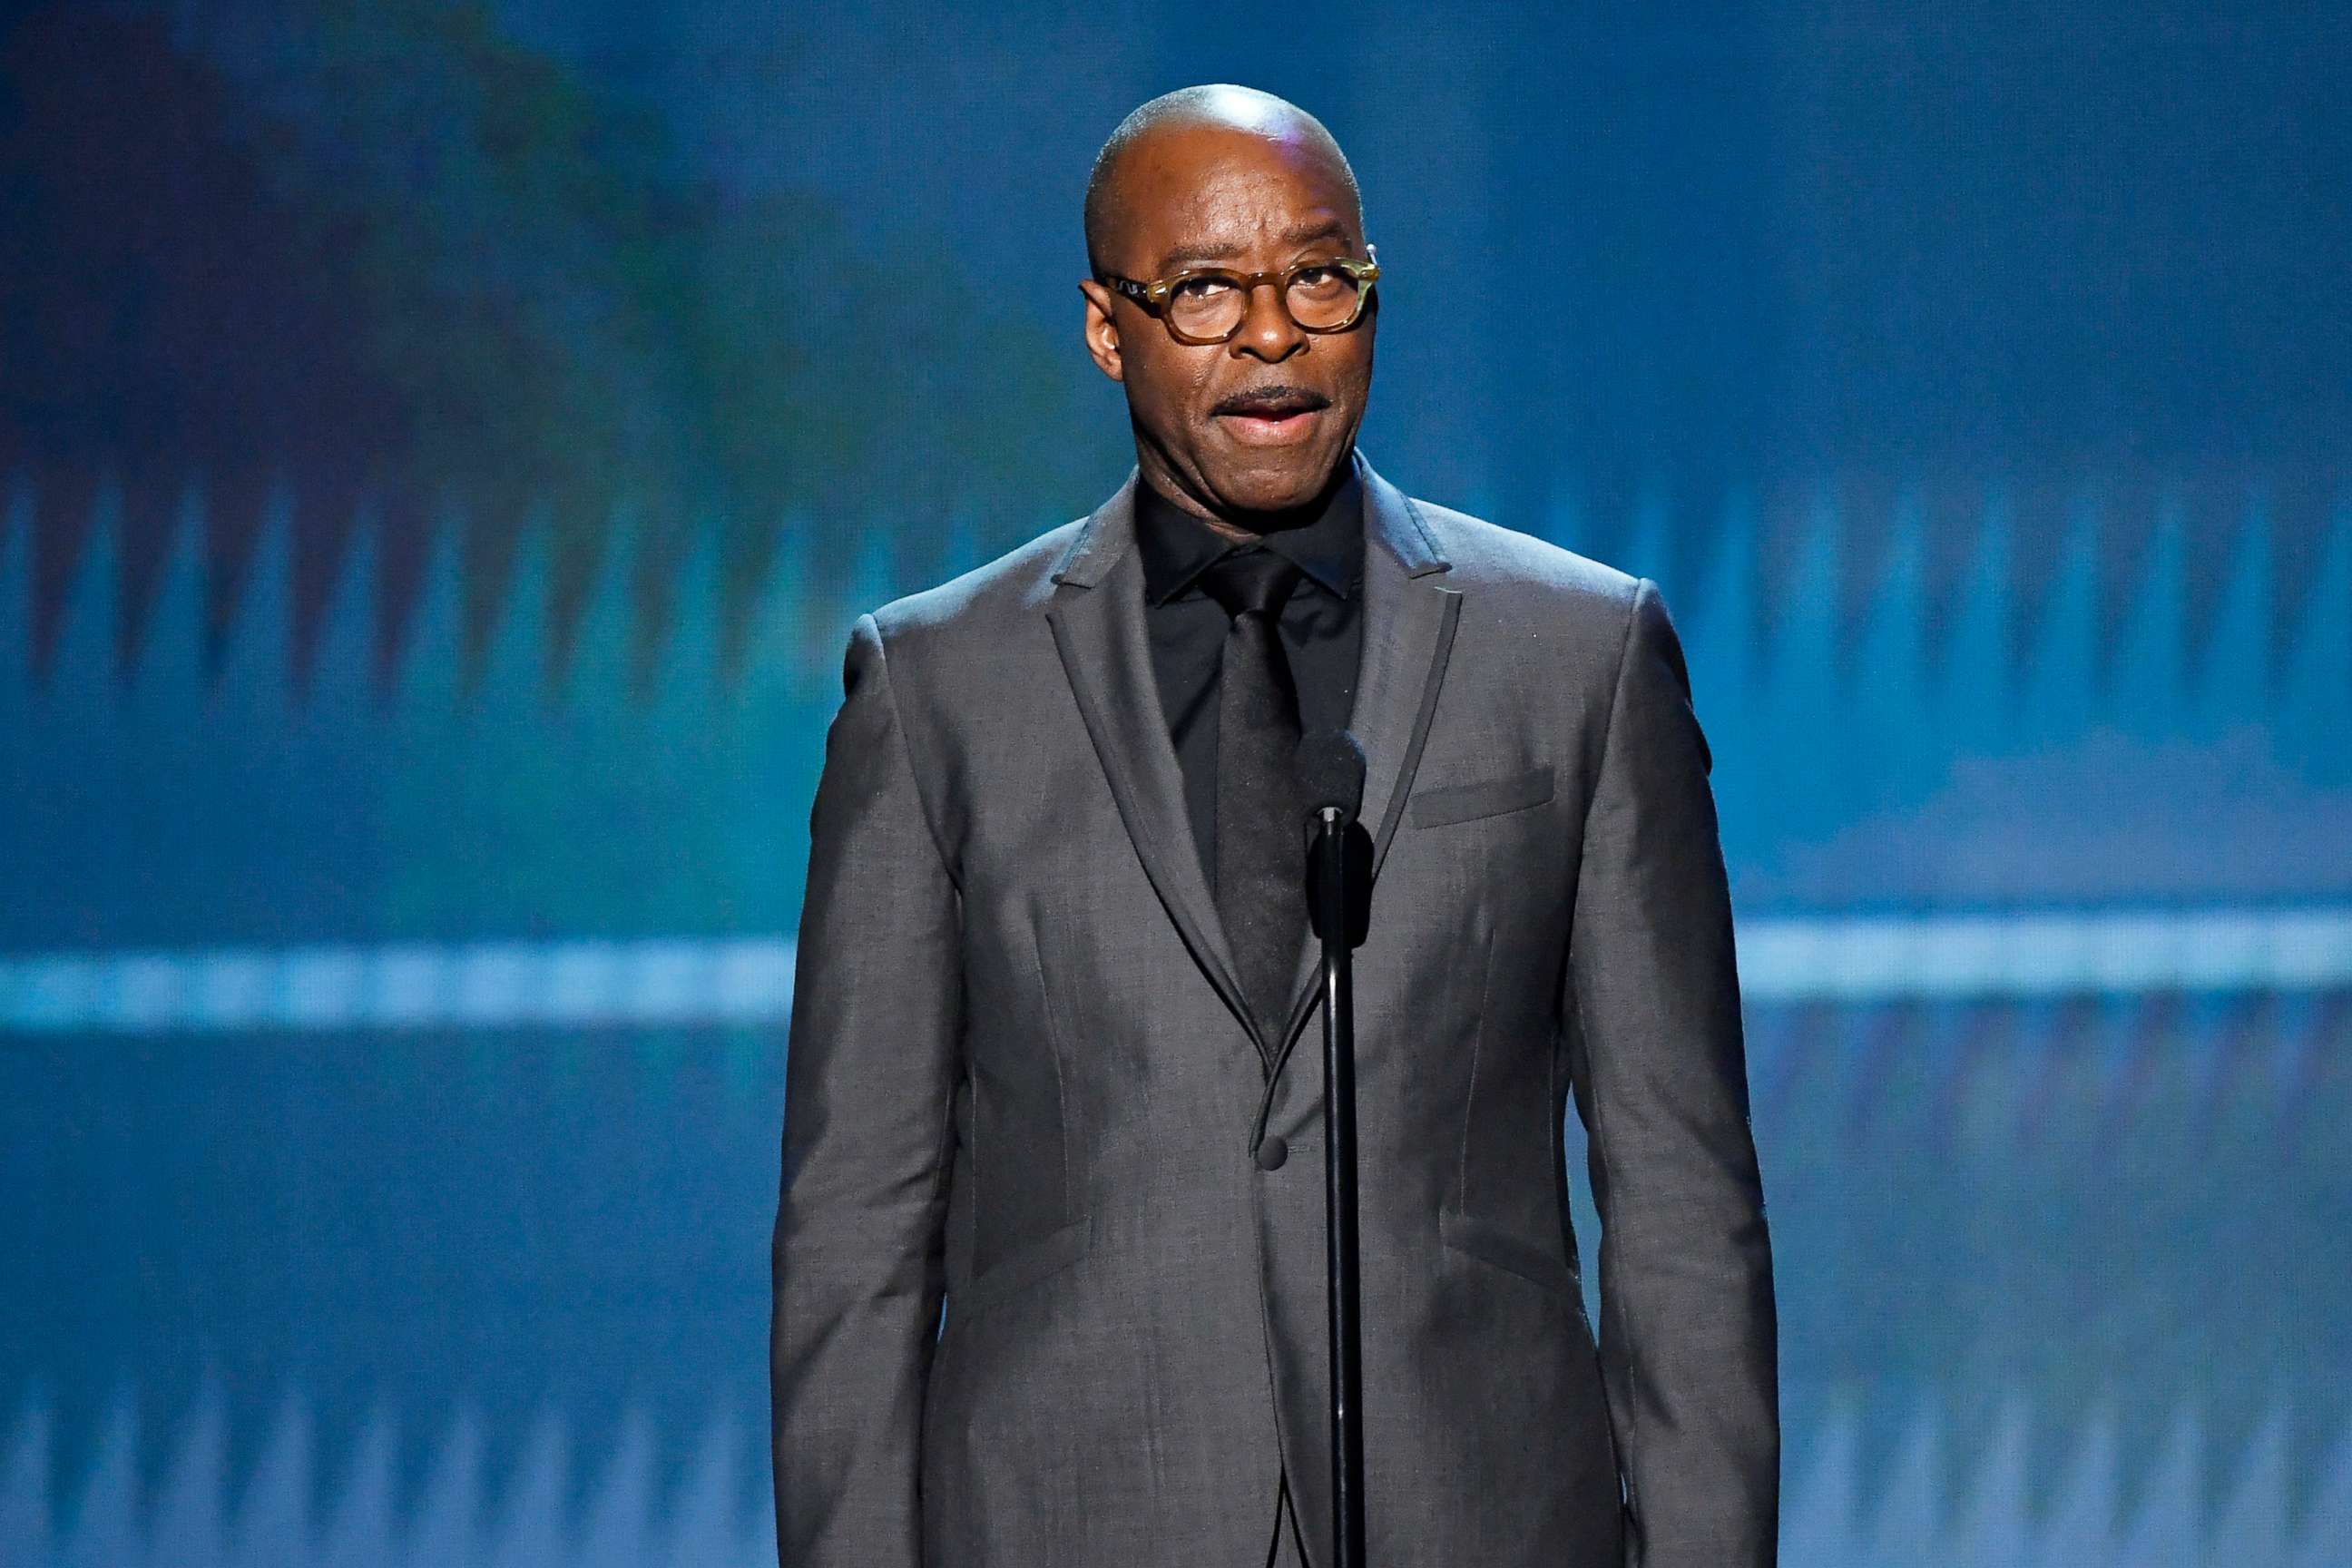 PHOTO: Courtney B. Vance speaks onstage at the 26th annual Screen Actors' Guild awards at the Shrine Auditorium, Jan. 19, 2020, in Los Angeles.